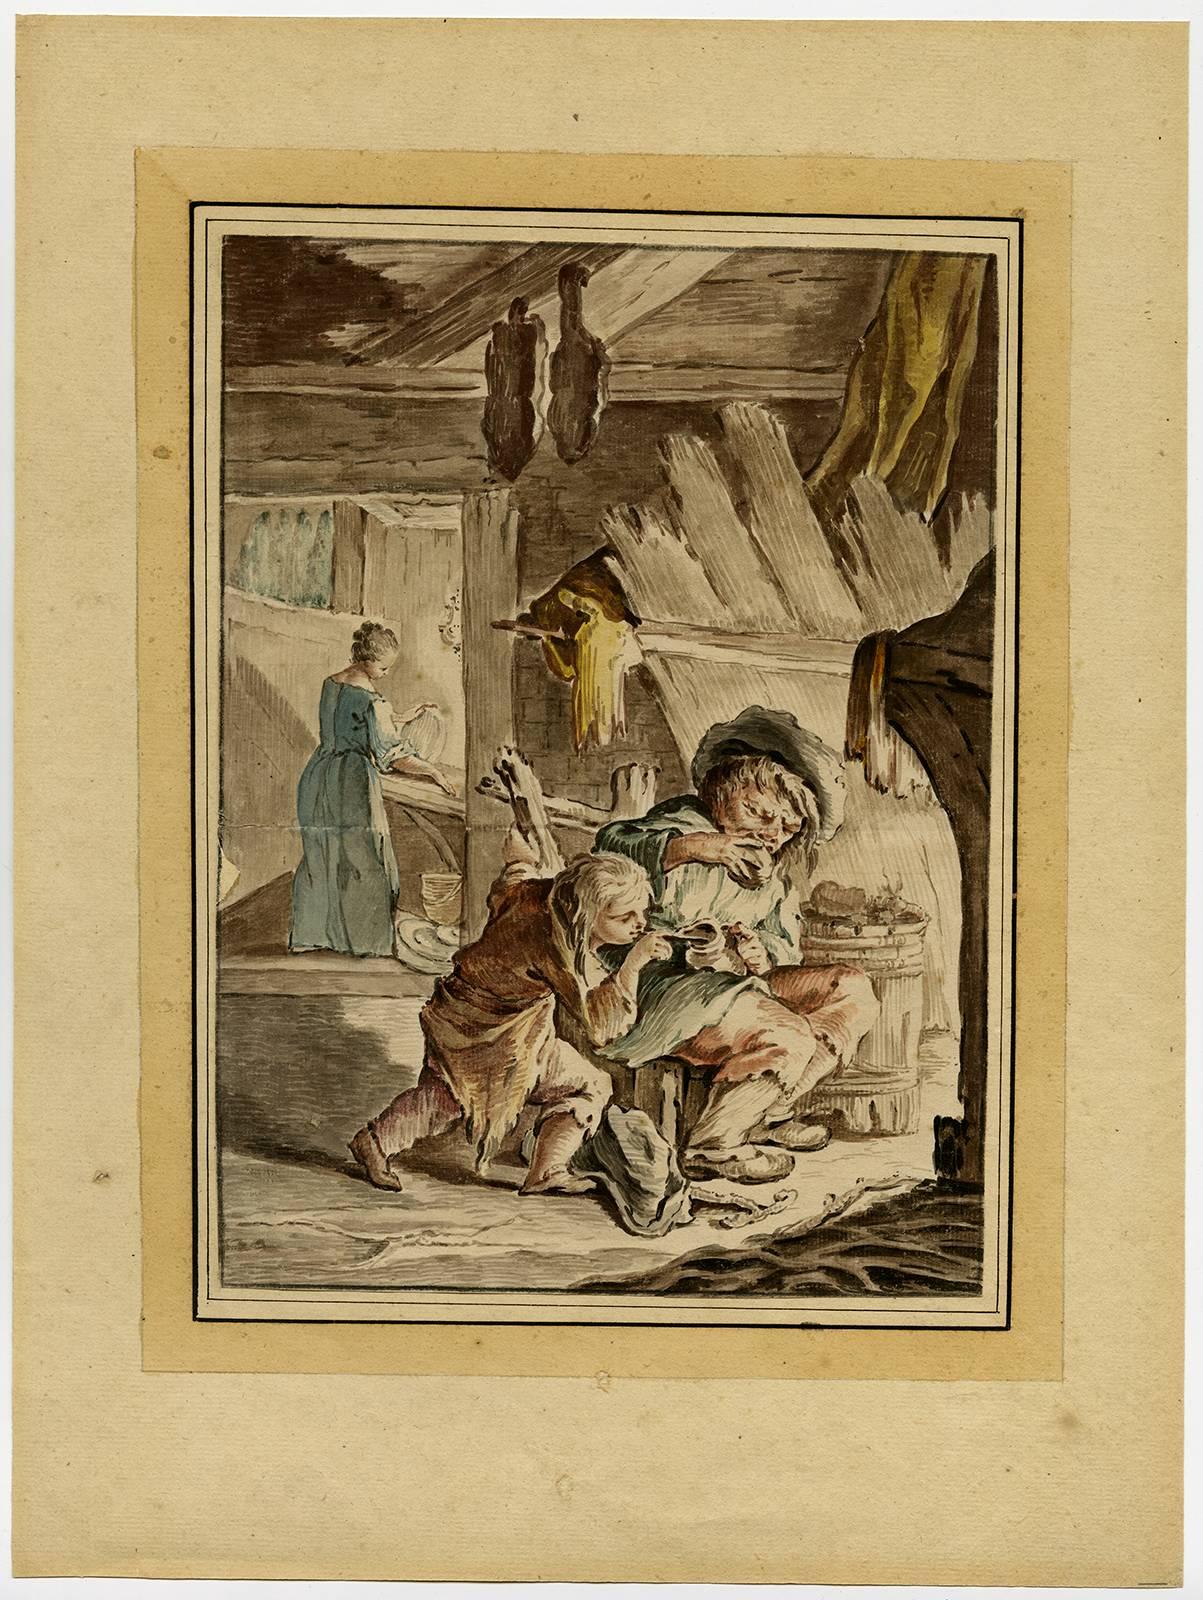 Unknown Interior Art - Untitled - A peasant and a boy near a fireplace